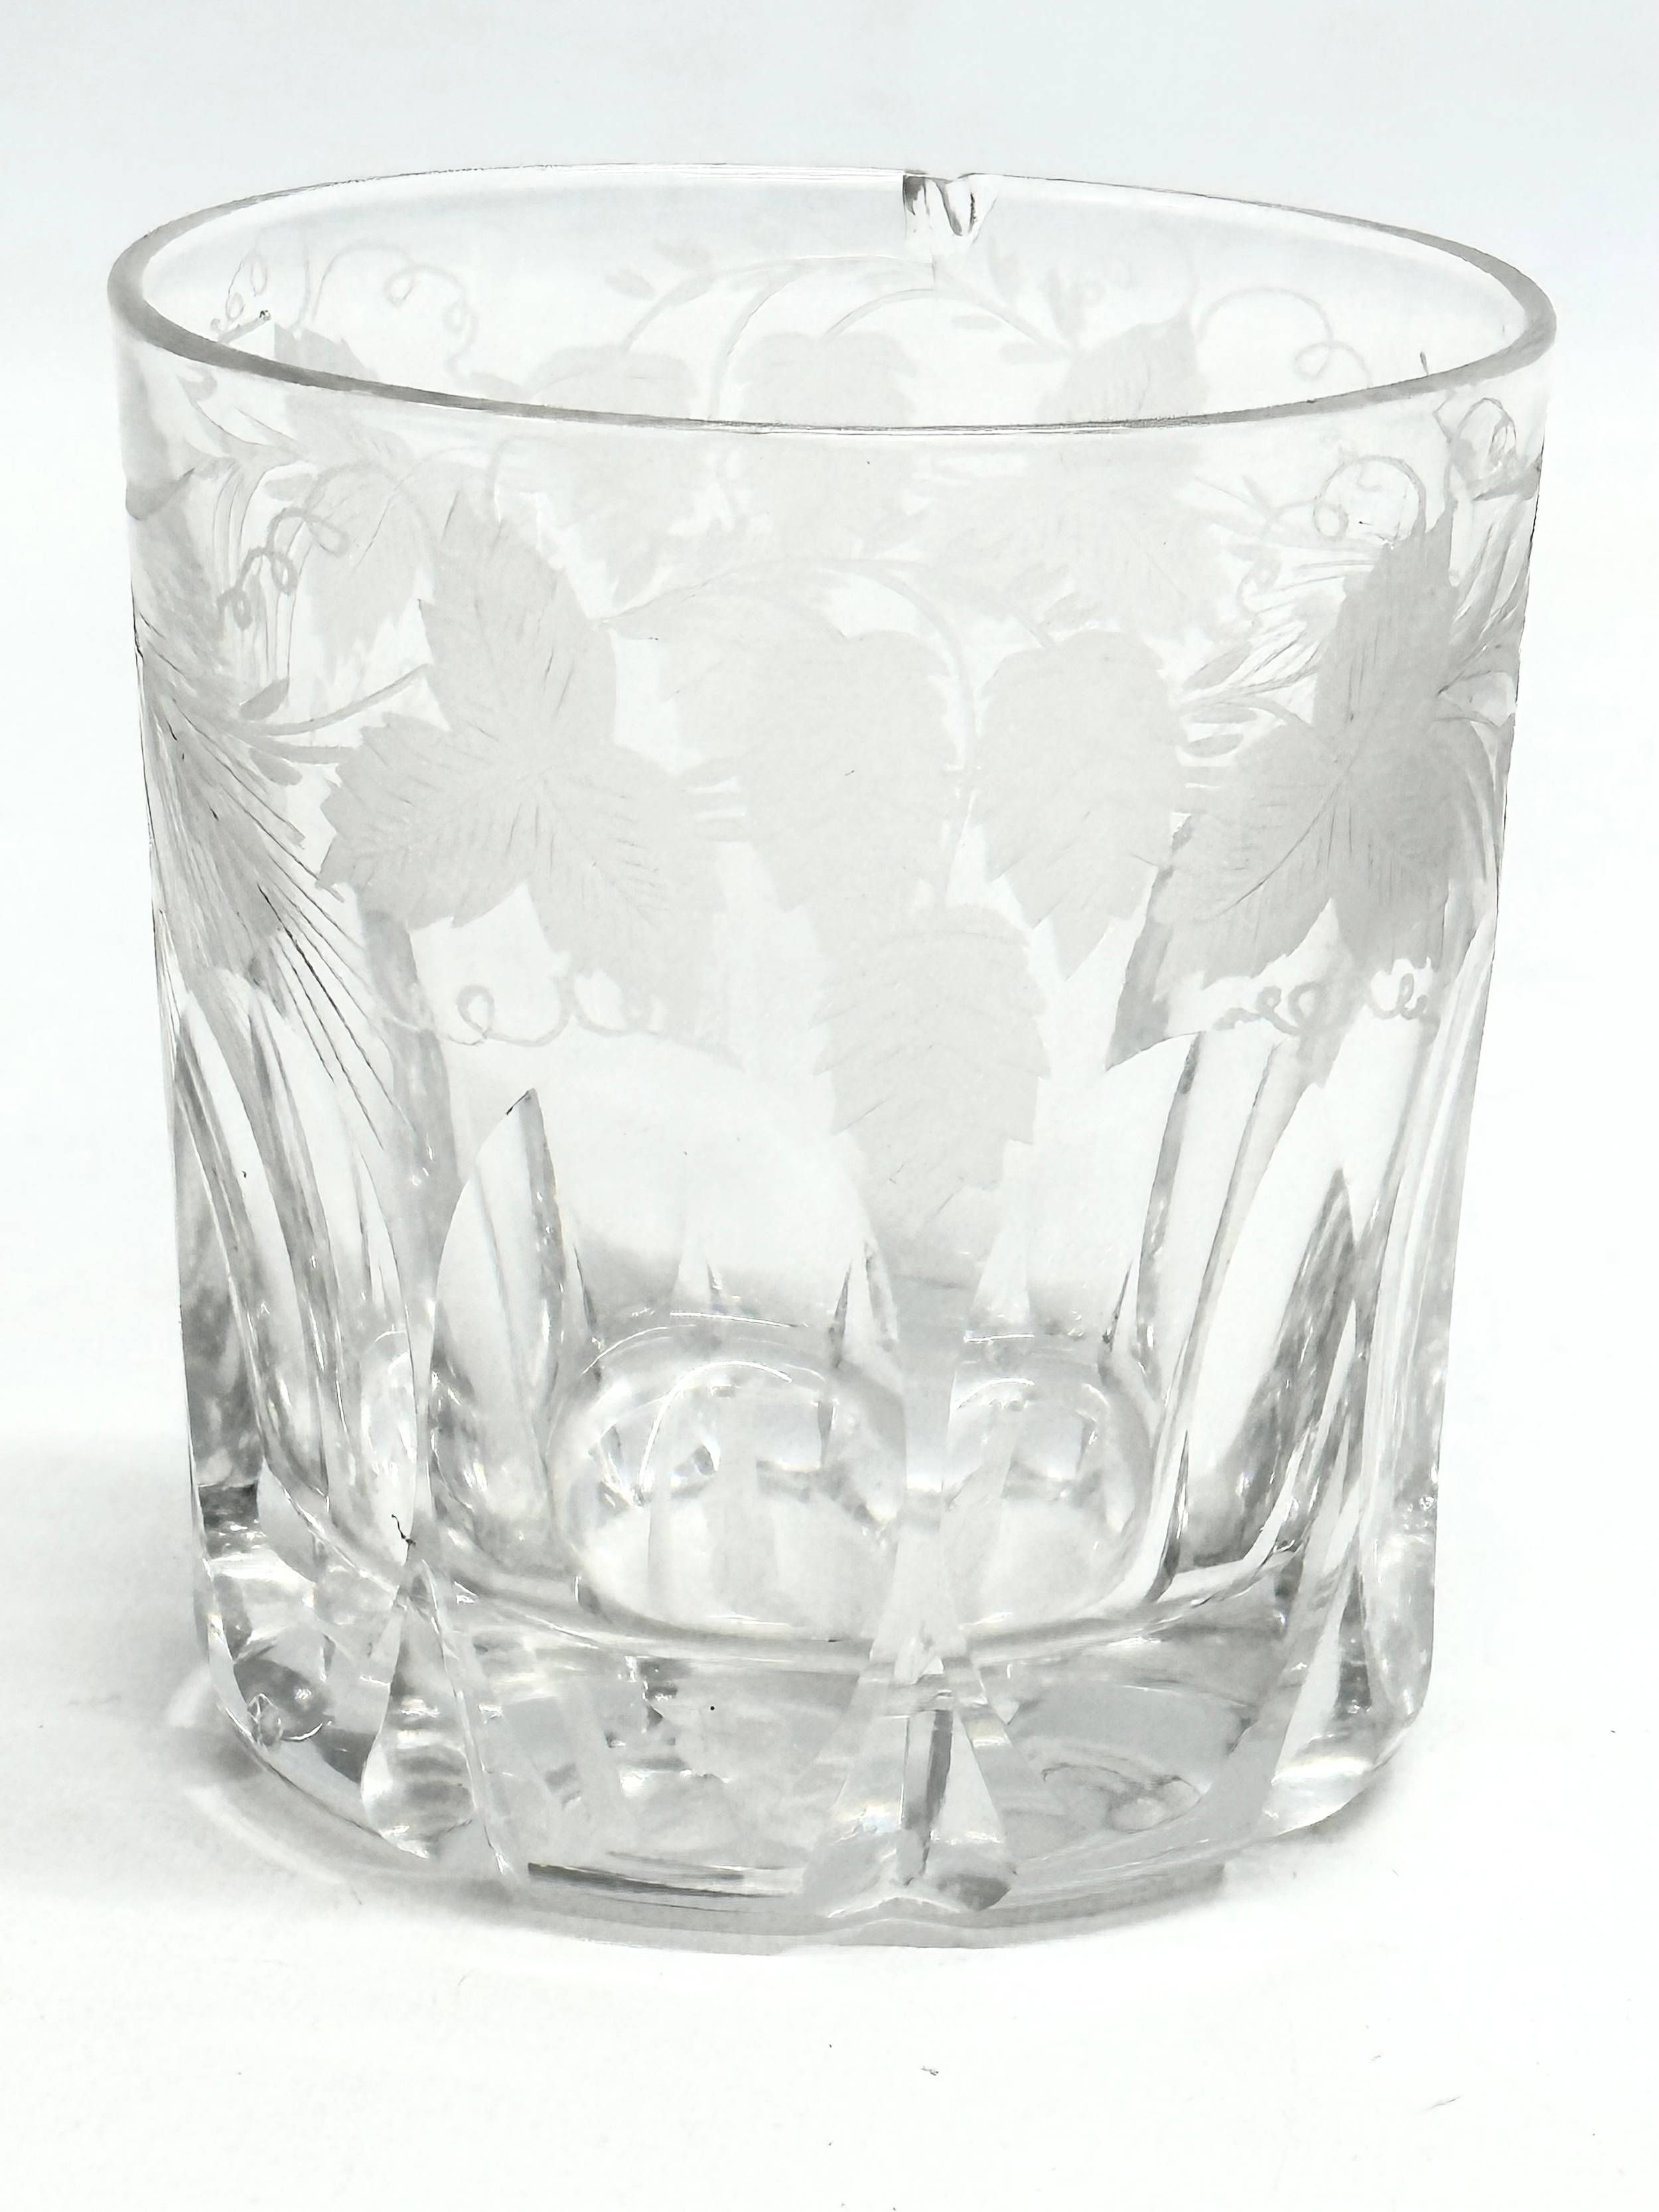 A rare Victorian ‘Last Drop’ whisky glass with etched leaves and pinecones. Circa 1860-1880. 9x9.5cm